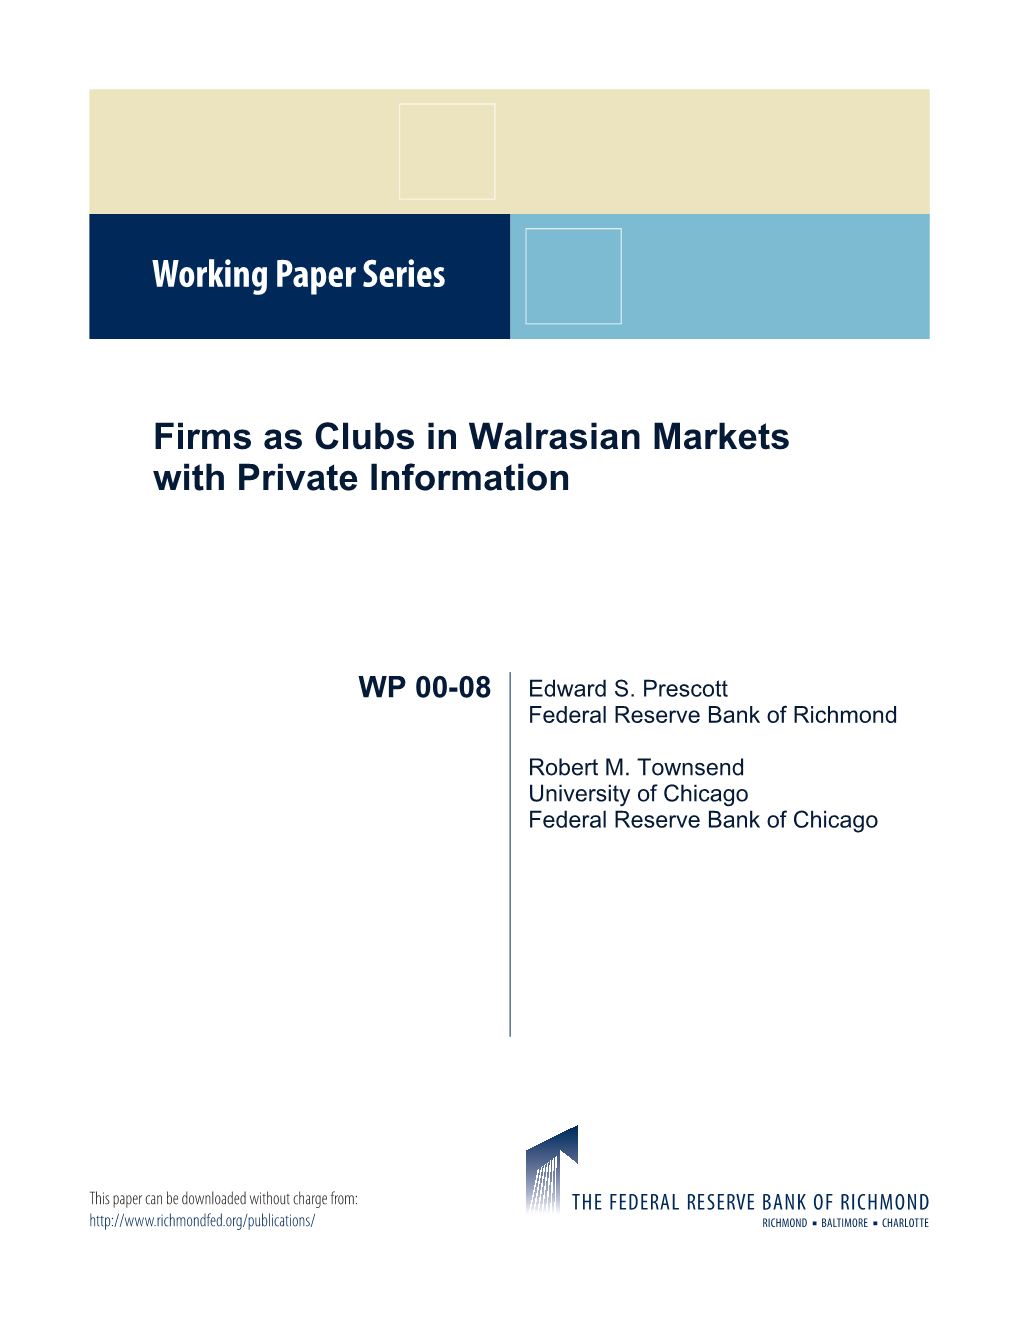 Firms As Clubs in Walrasian Markets with Private Information